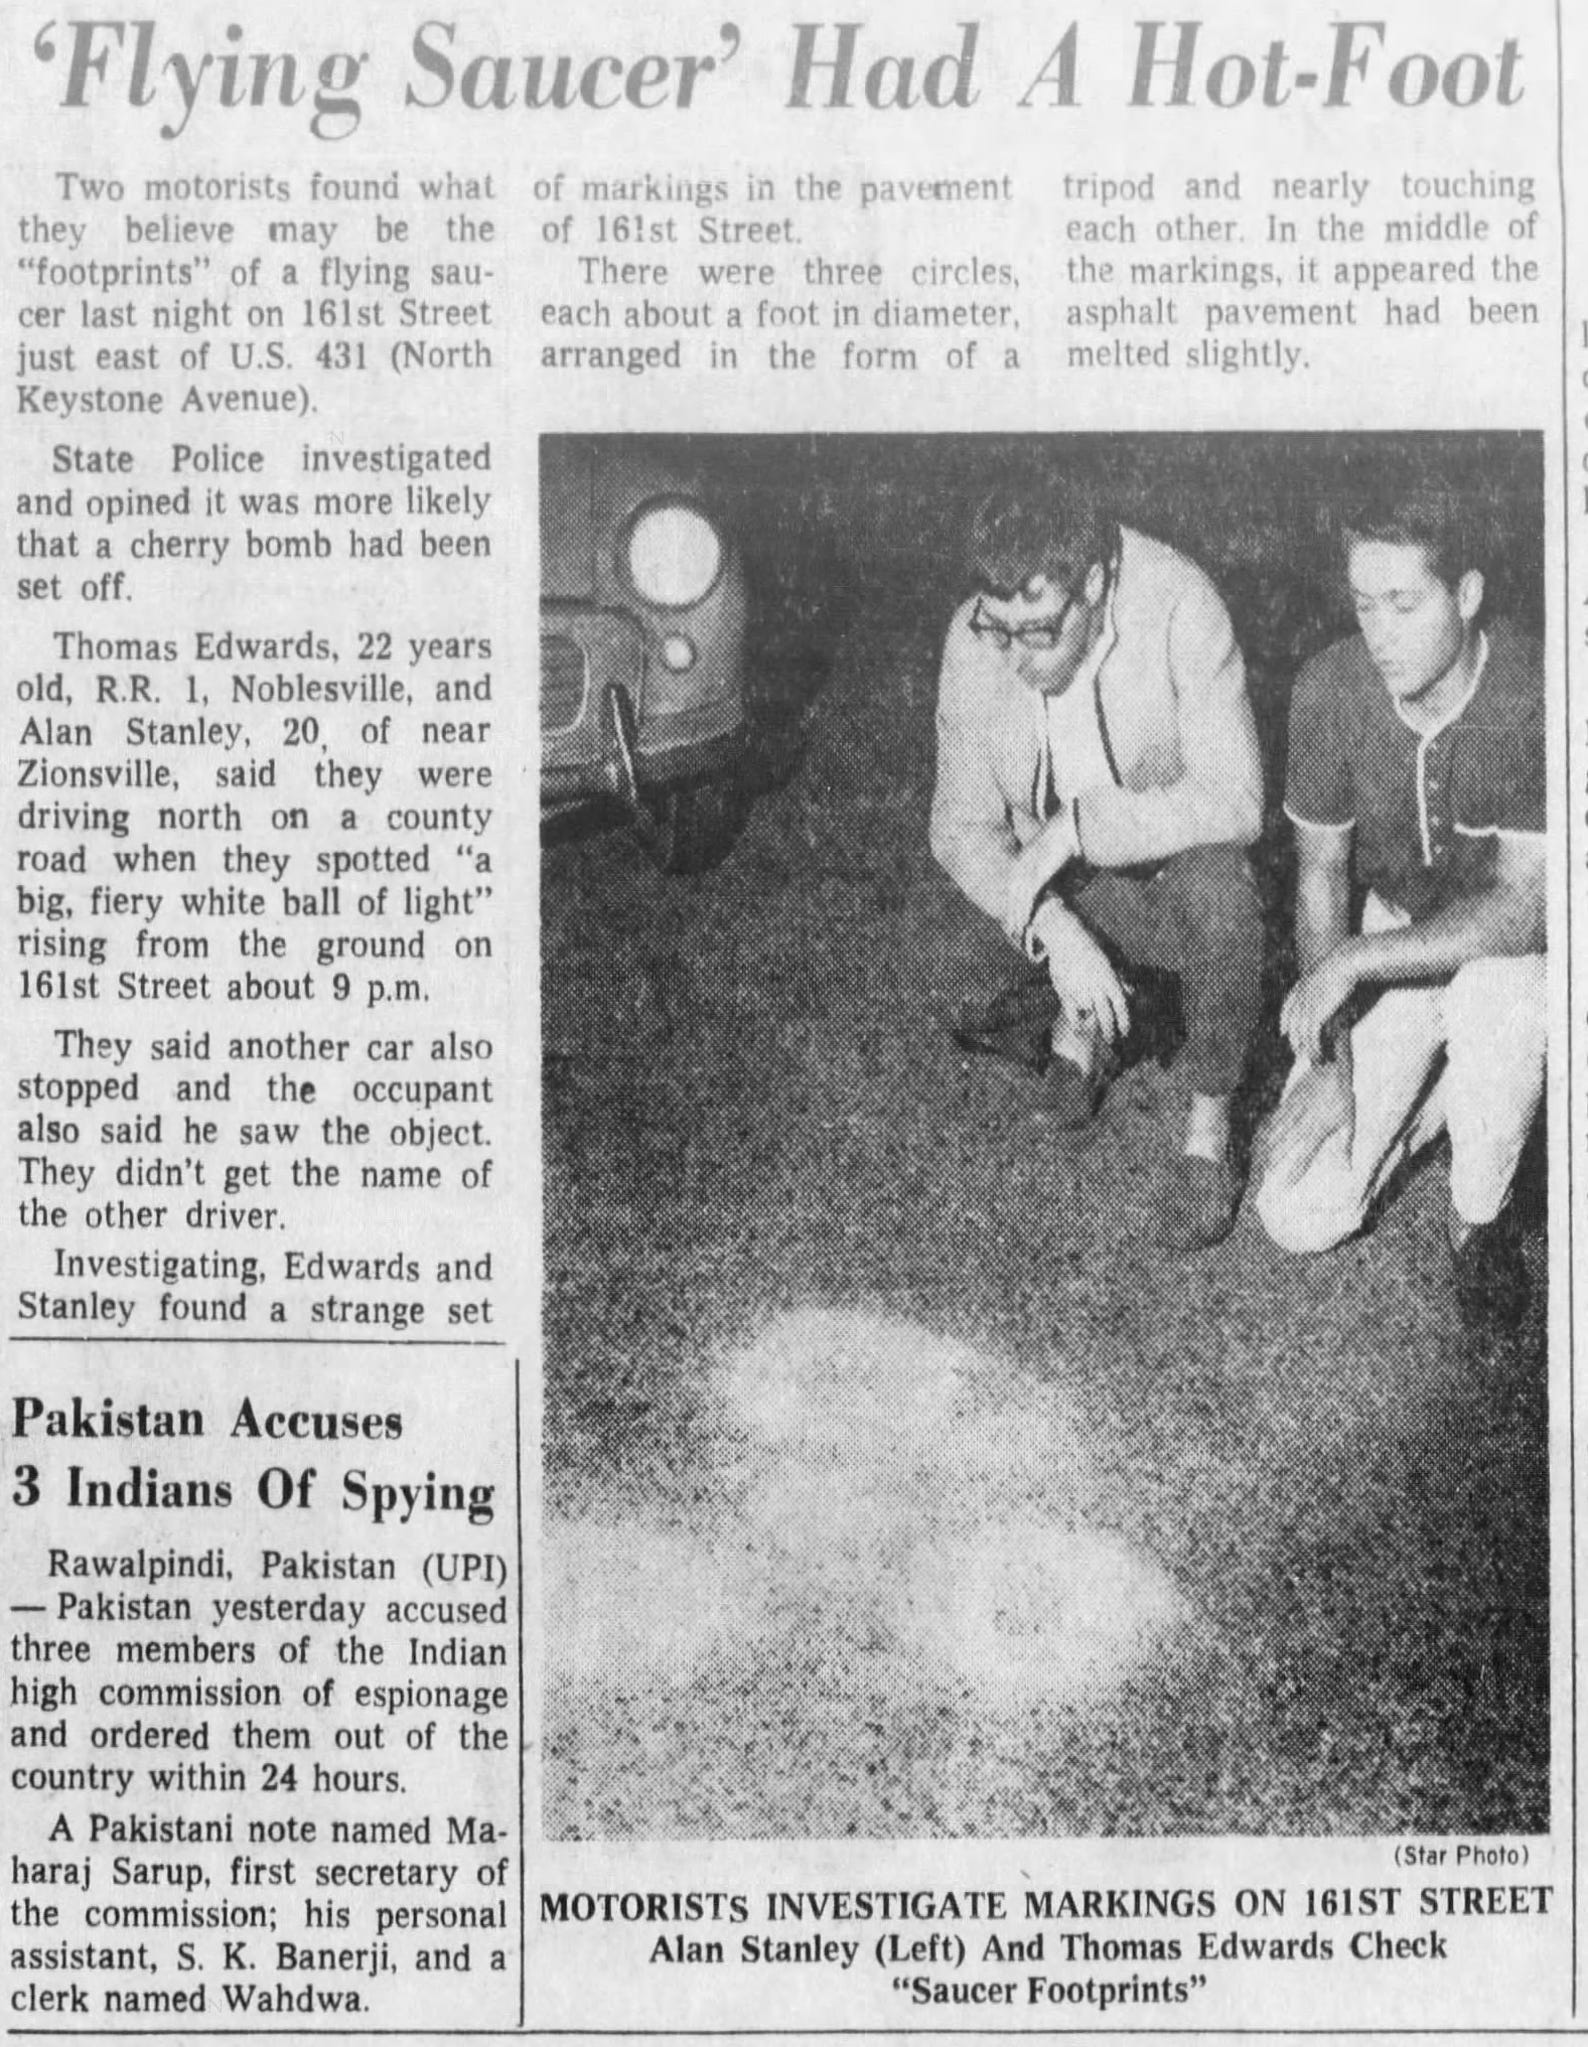 The Indianapolis Star reported on two motorists said they found possible UFO markings on their country road drive. Aug. 24, 1967.